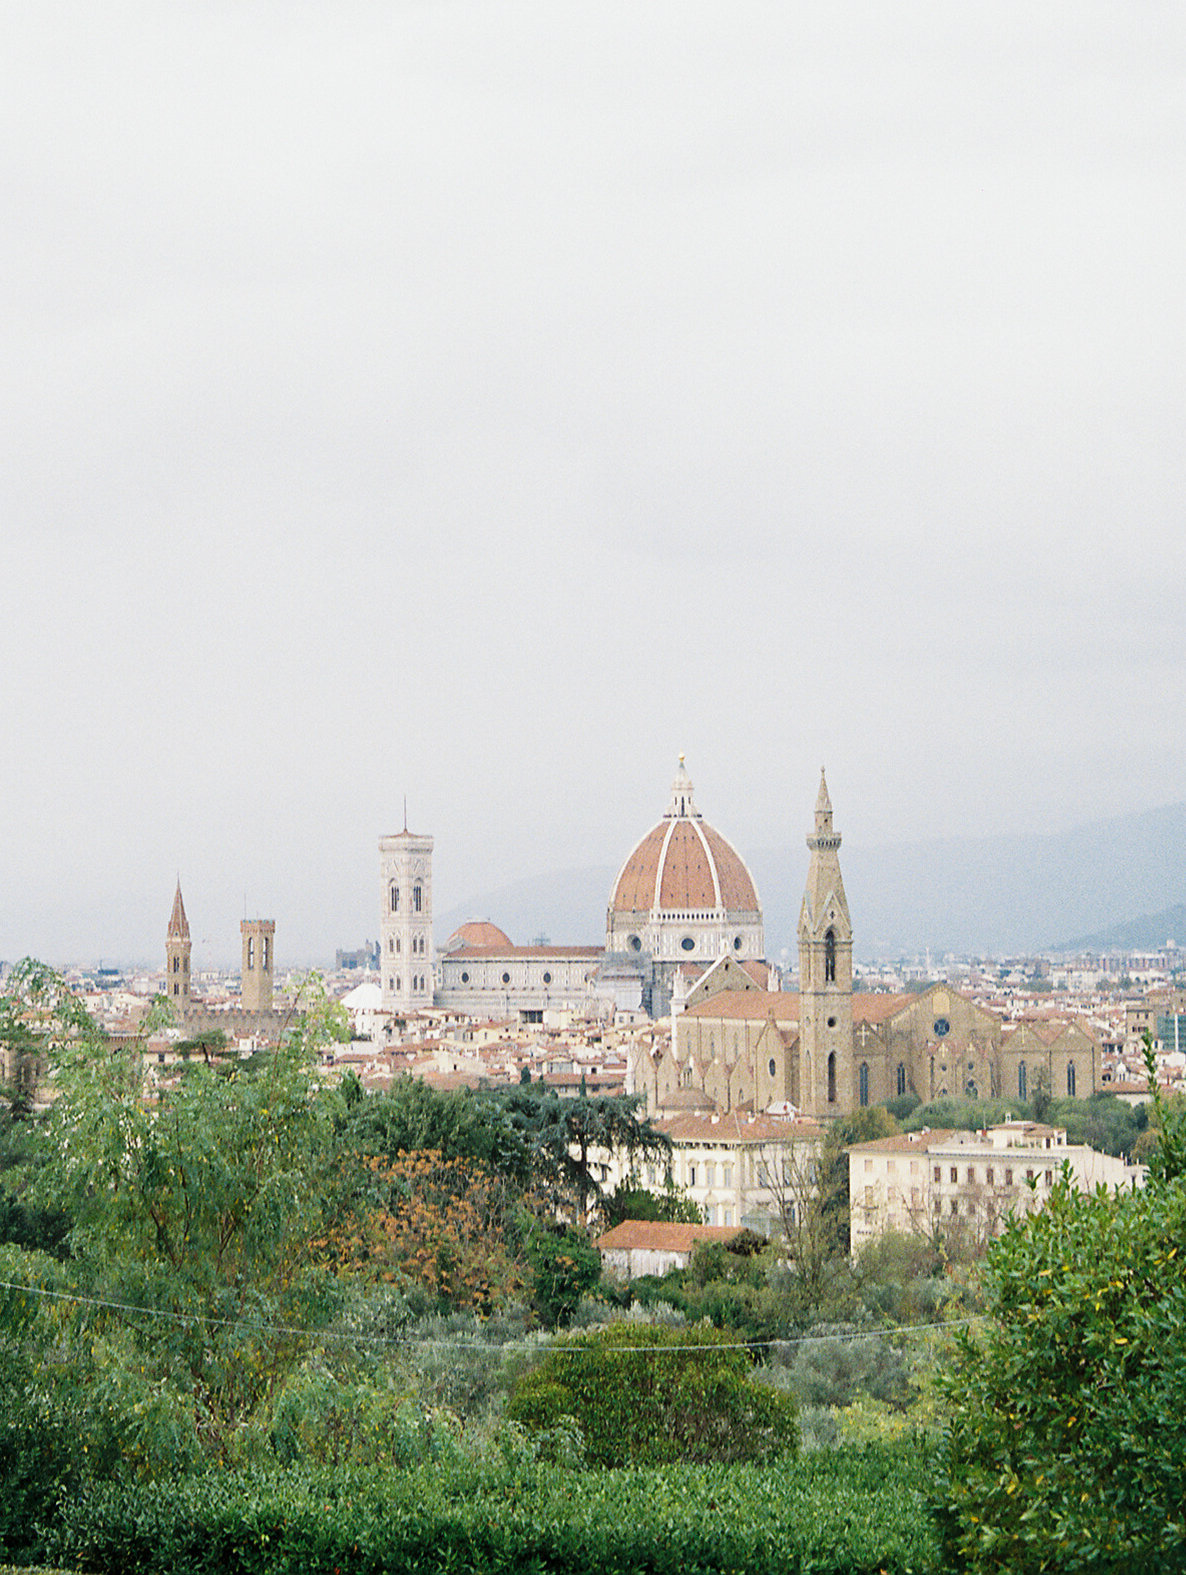 scenic photo of the duomo in florence italy